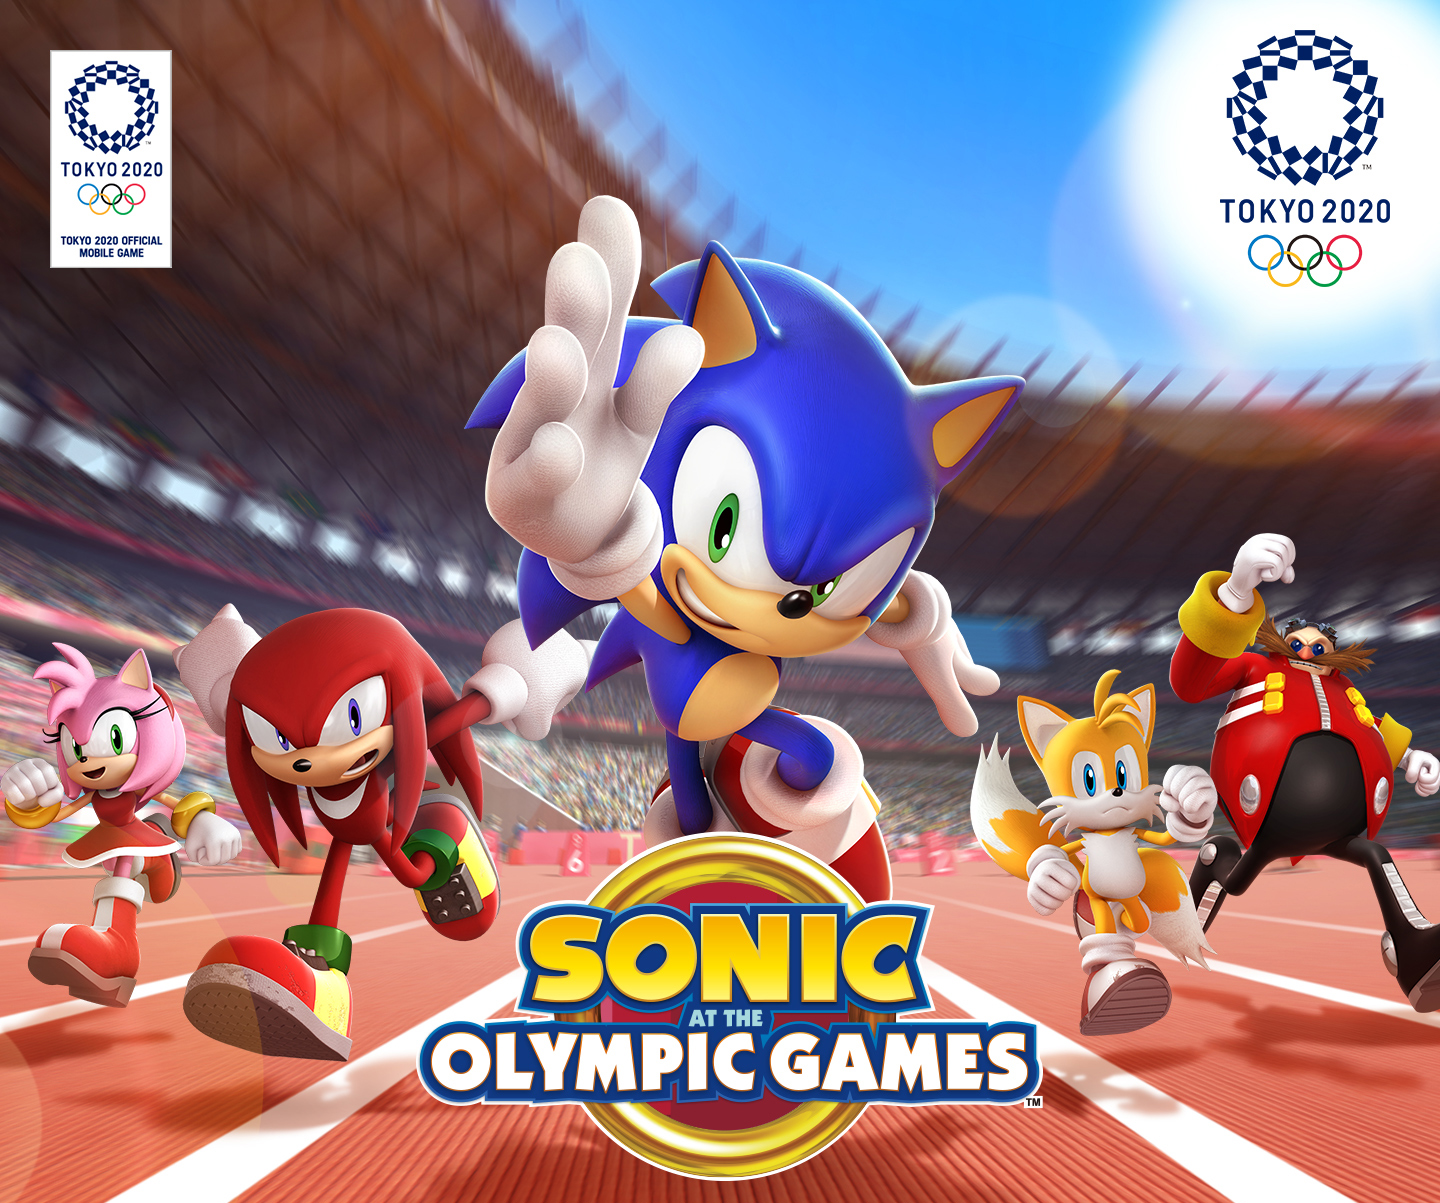 Olympic Games Tokyo 2020 – The Official Video Game Is Now